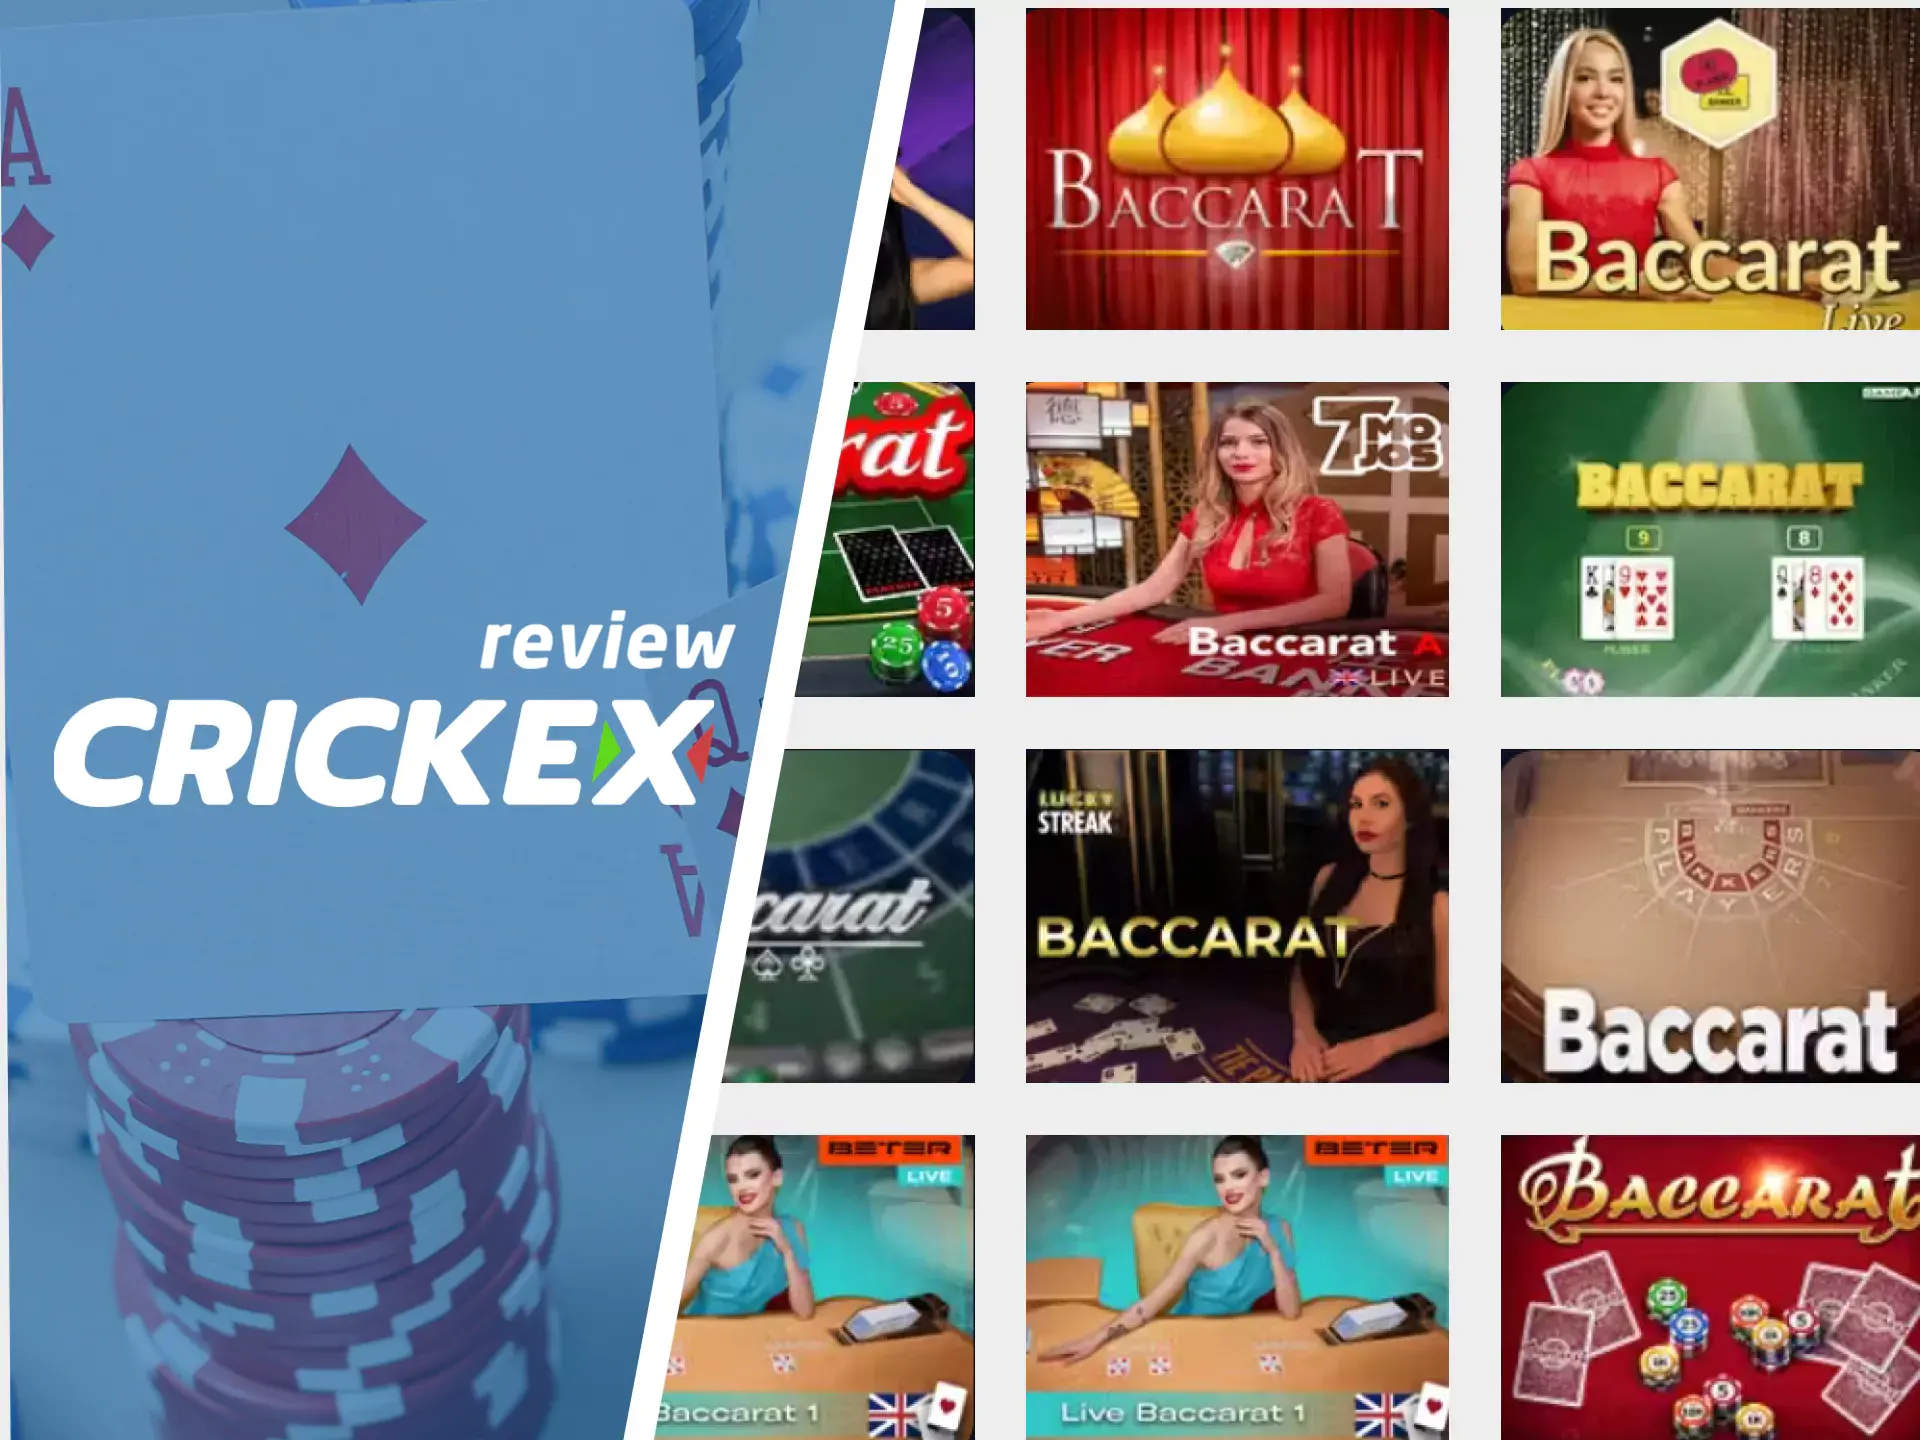 For casino games, choose baccarat from Crickex.